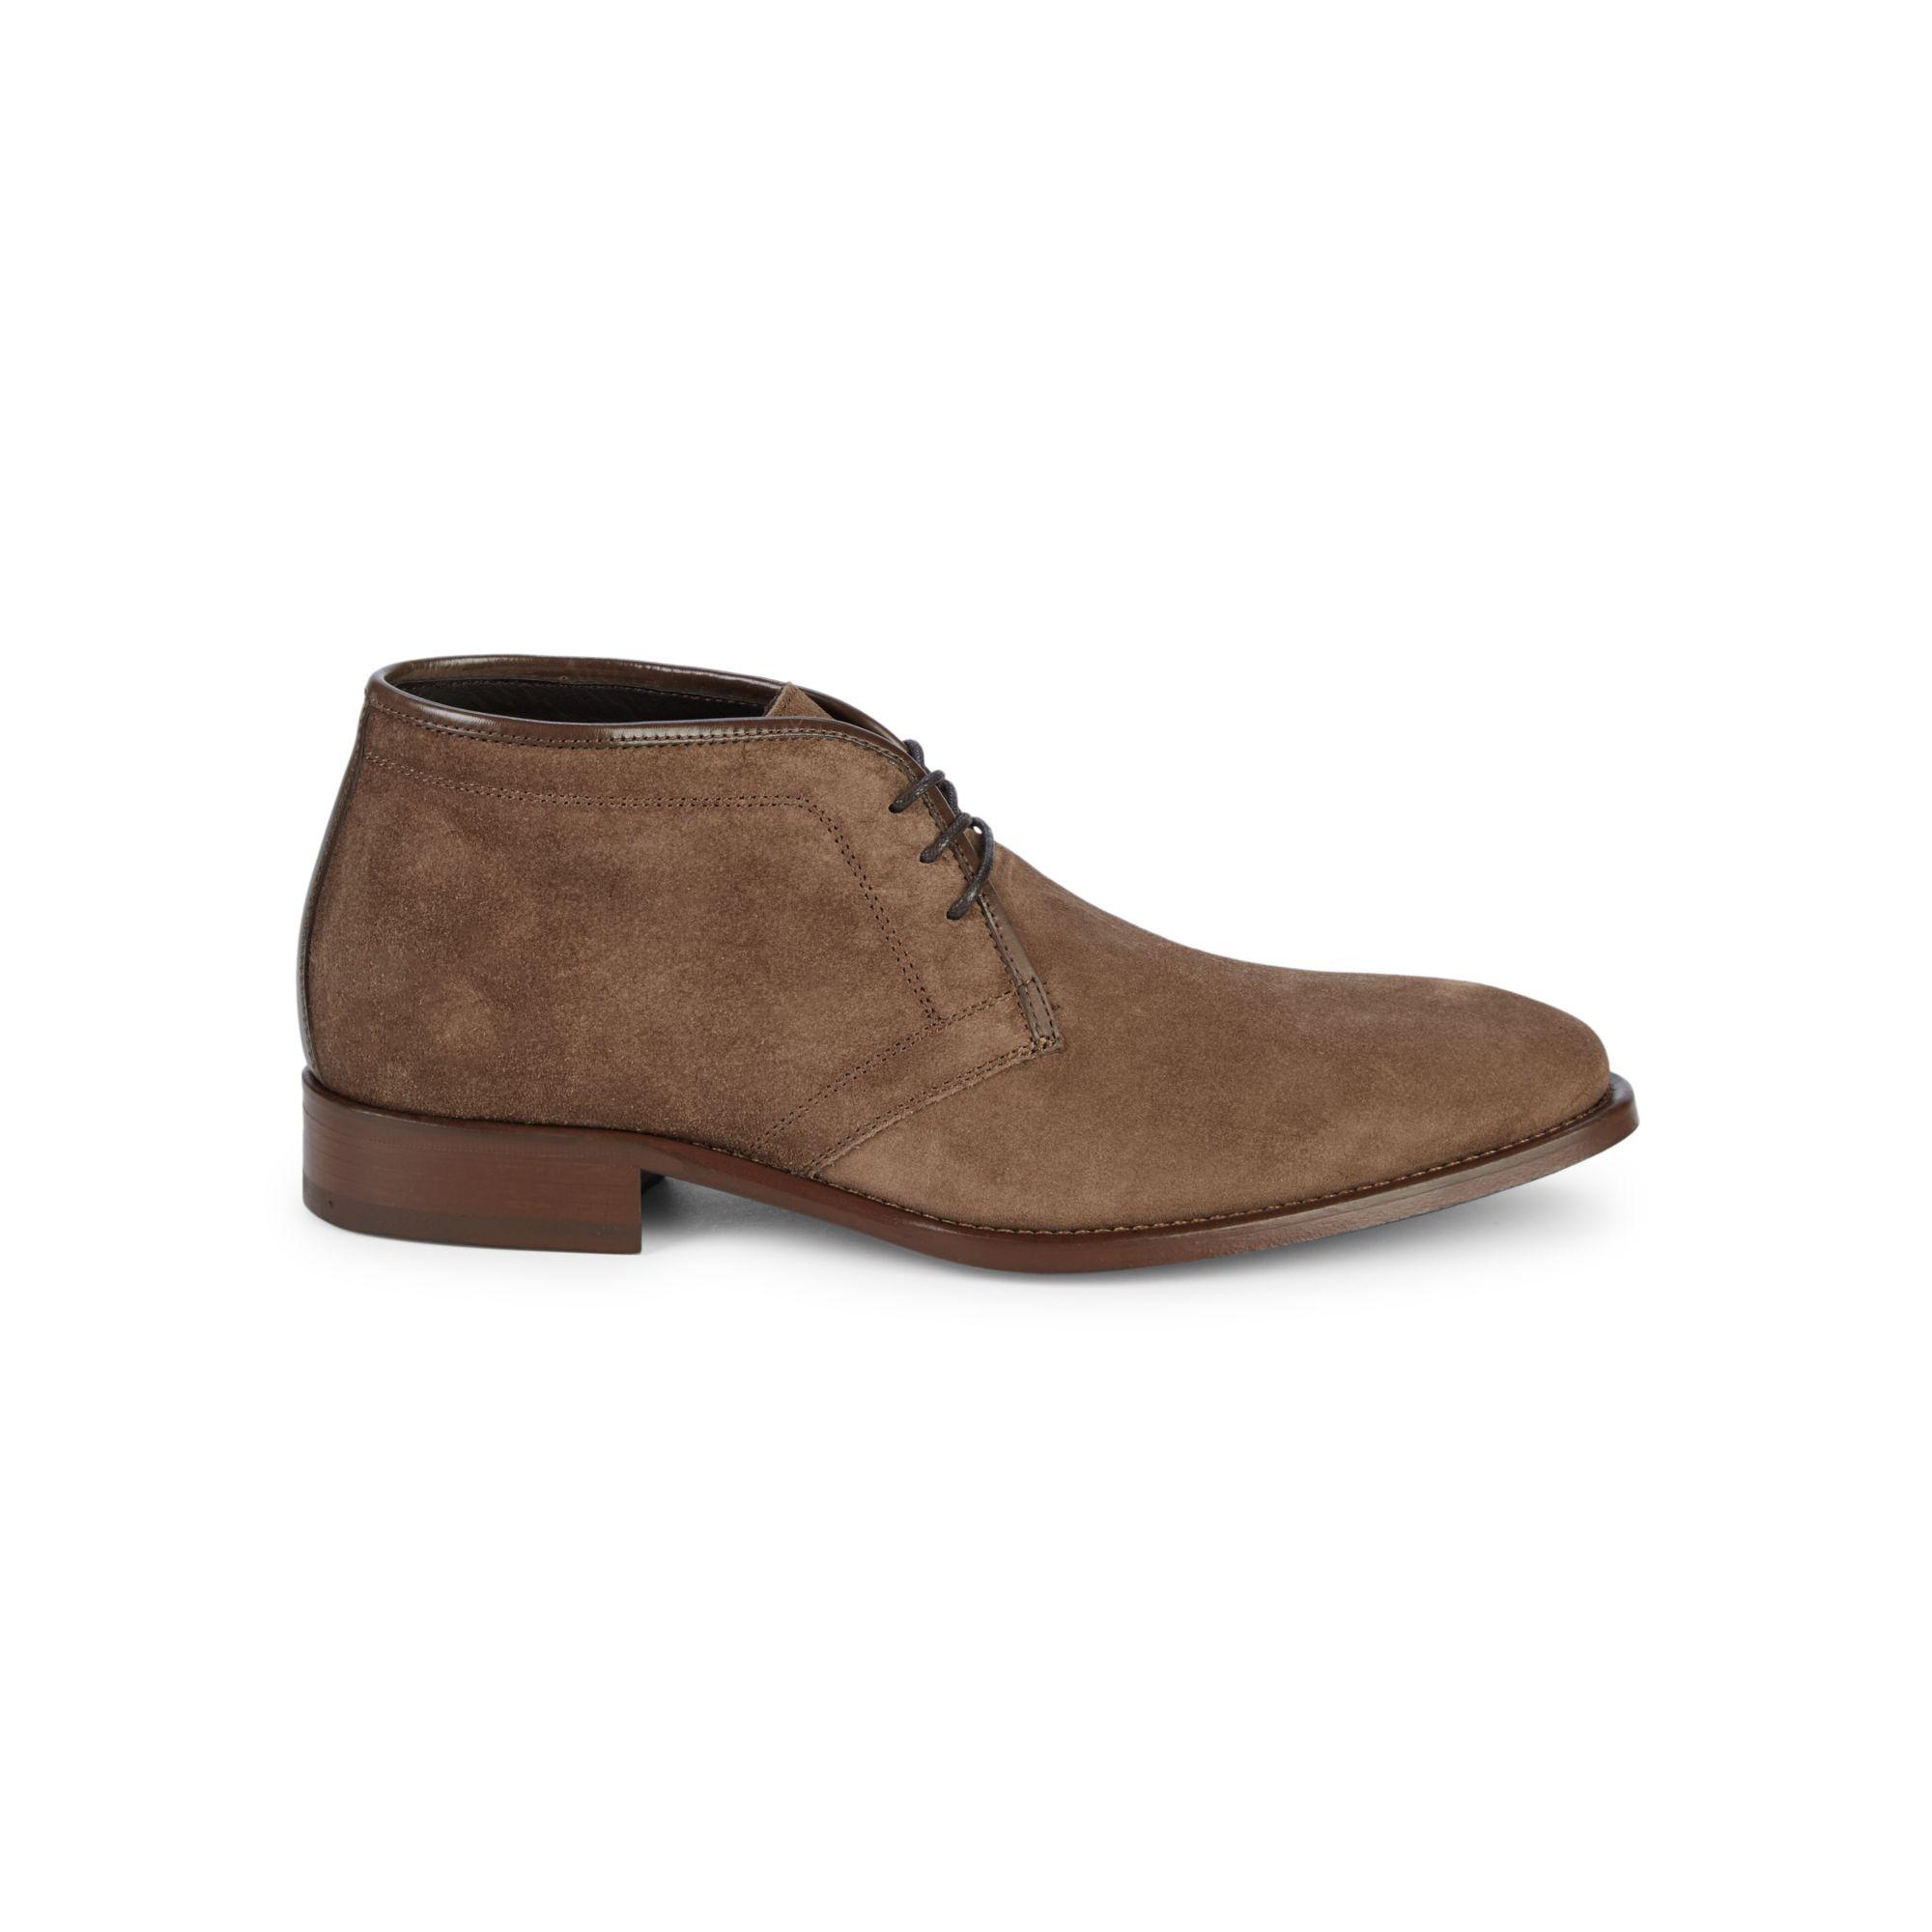 Johnston & Murphy Cormac Suede Chukka Boots in Taupe (Brown) for Men - Lyst